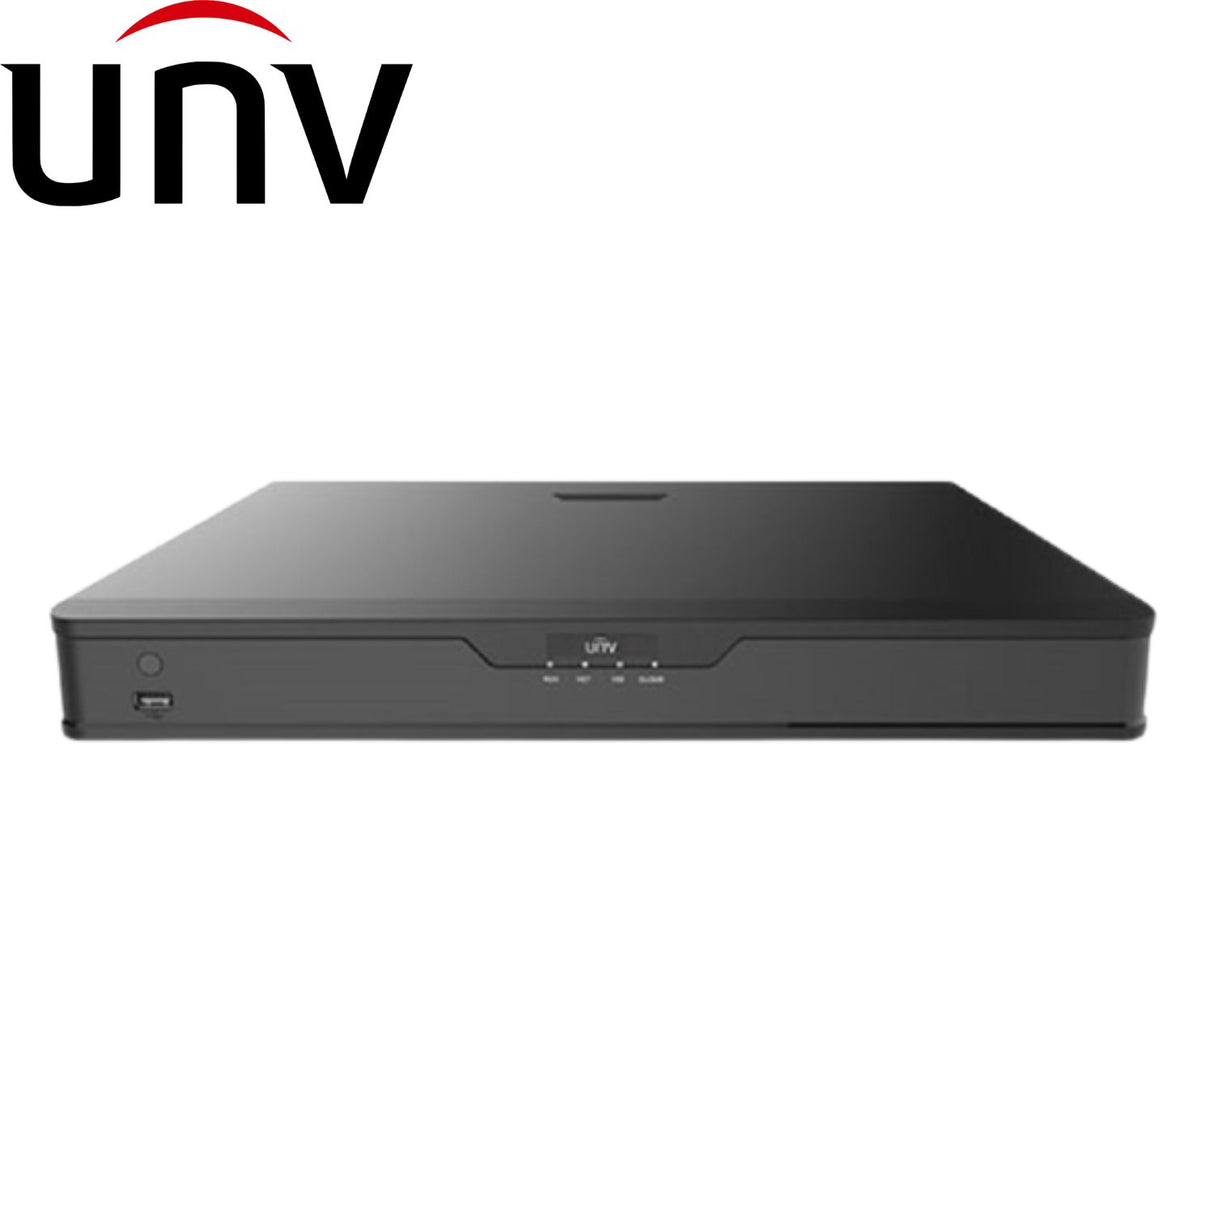 Uniview 8CH Network Video Recorder: upto 12MP, 320MBPS INPUT, 2-SATA HDD, Easy Series - NVR302-08E2-P8